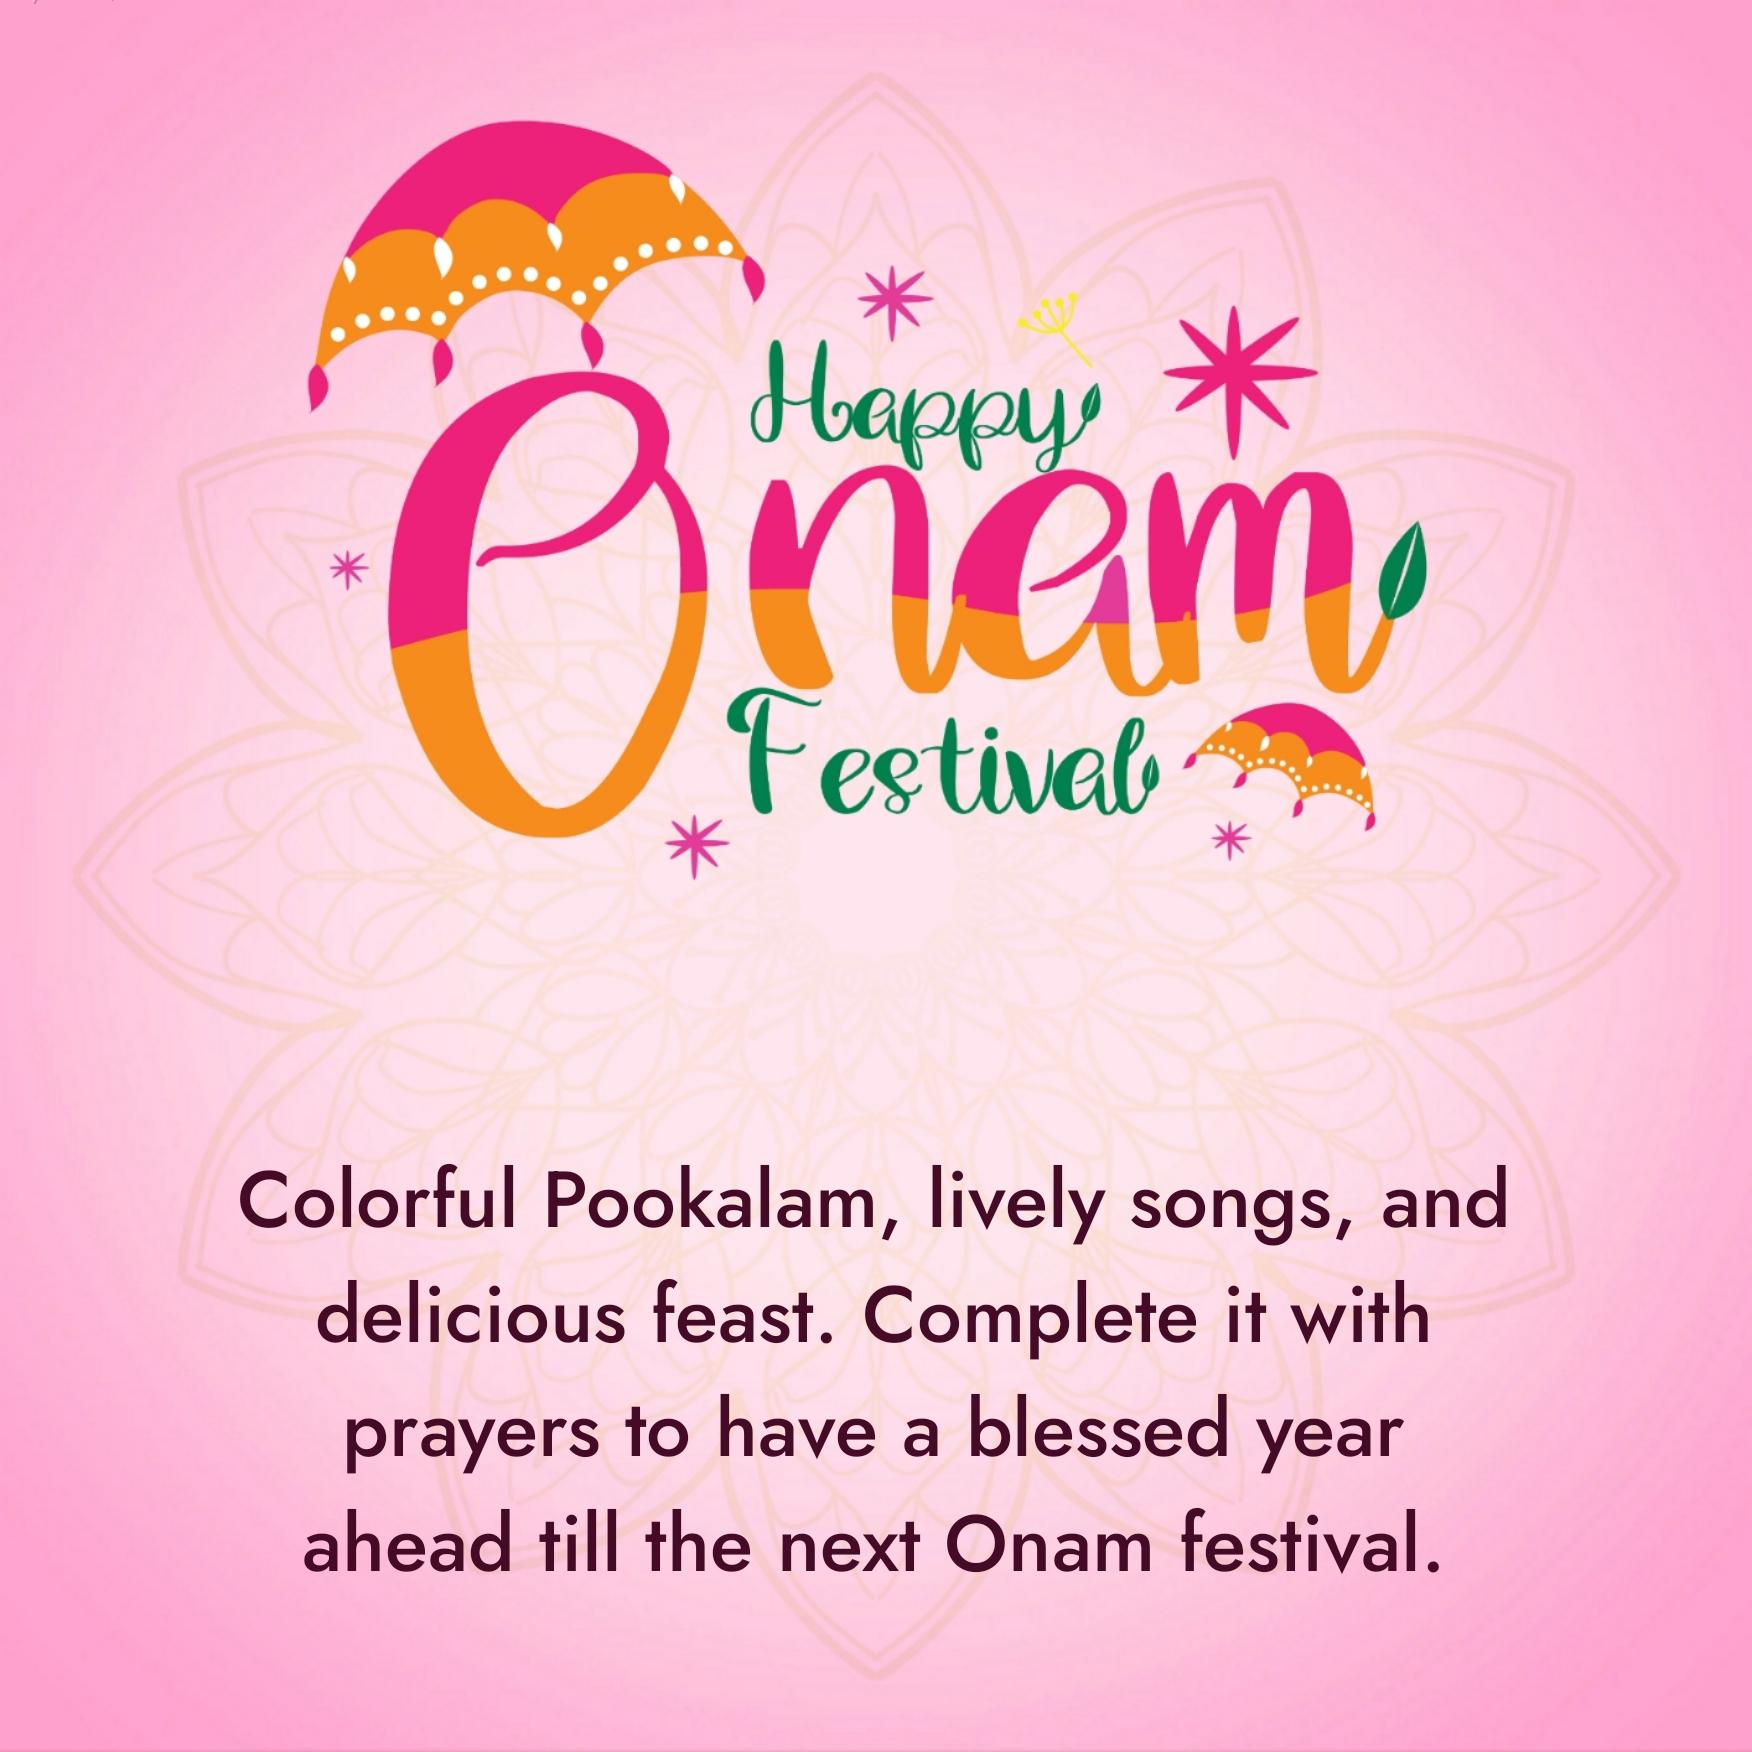 Colorful Pookalam lively songs and delicious feast